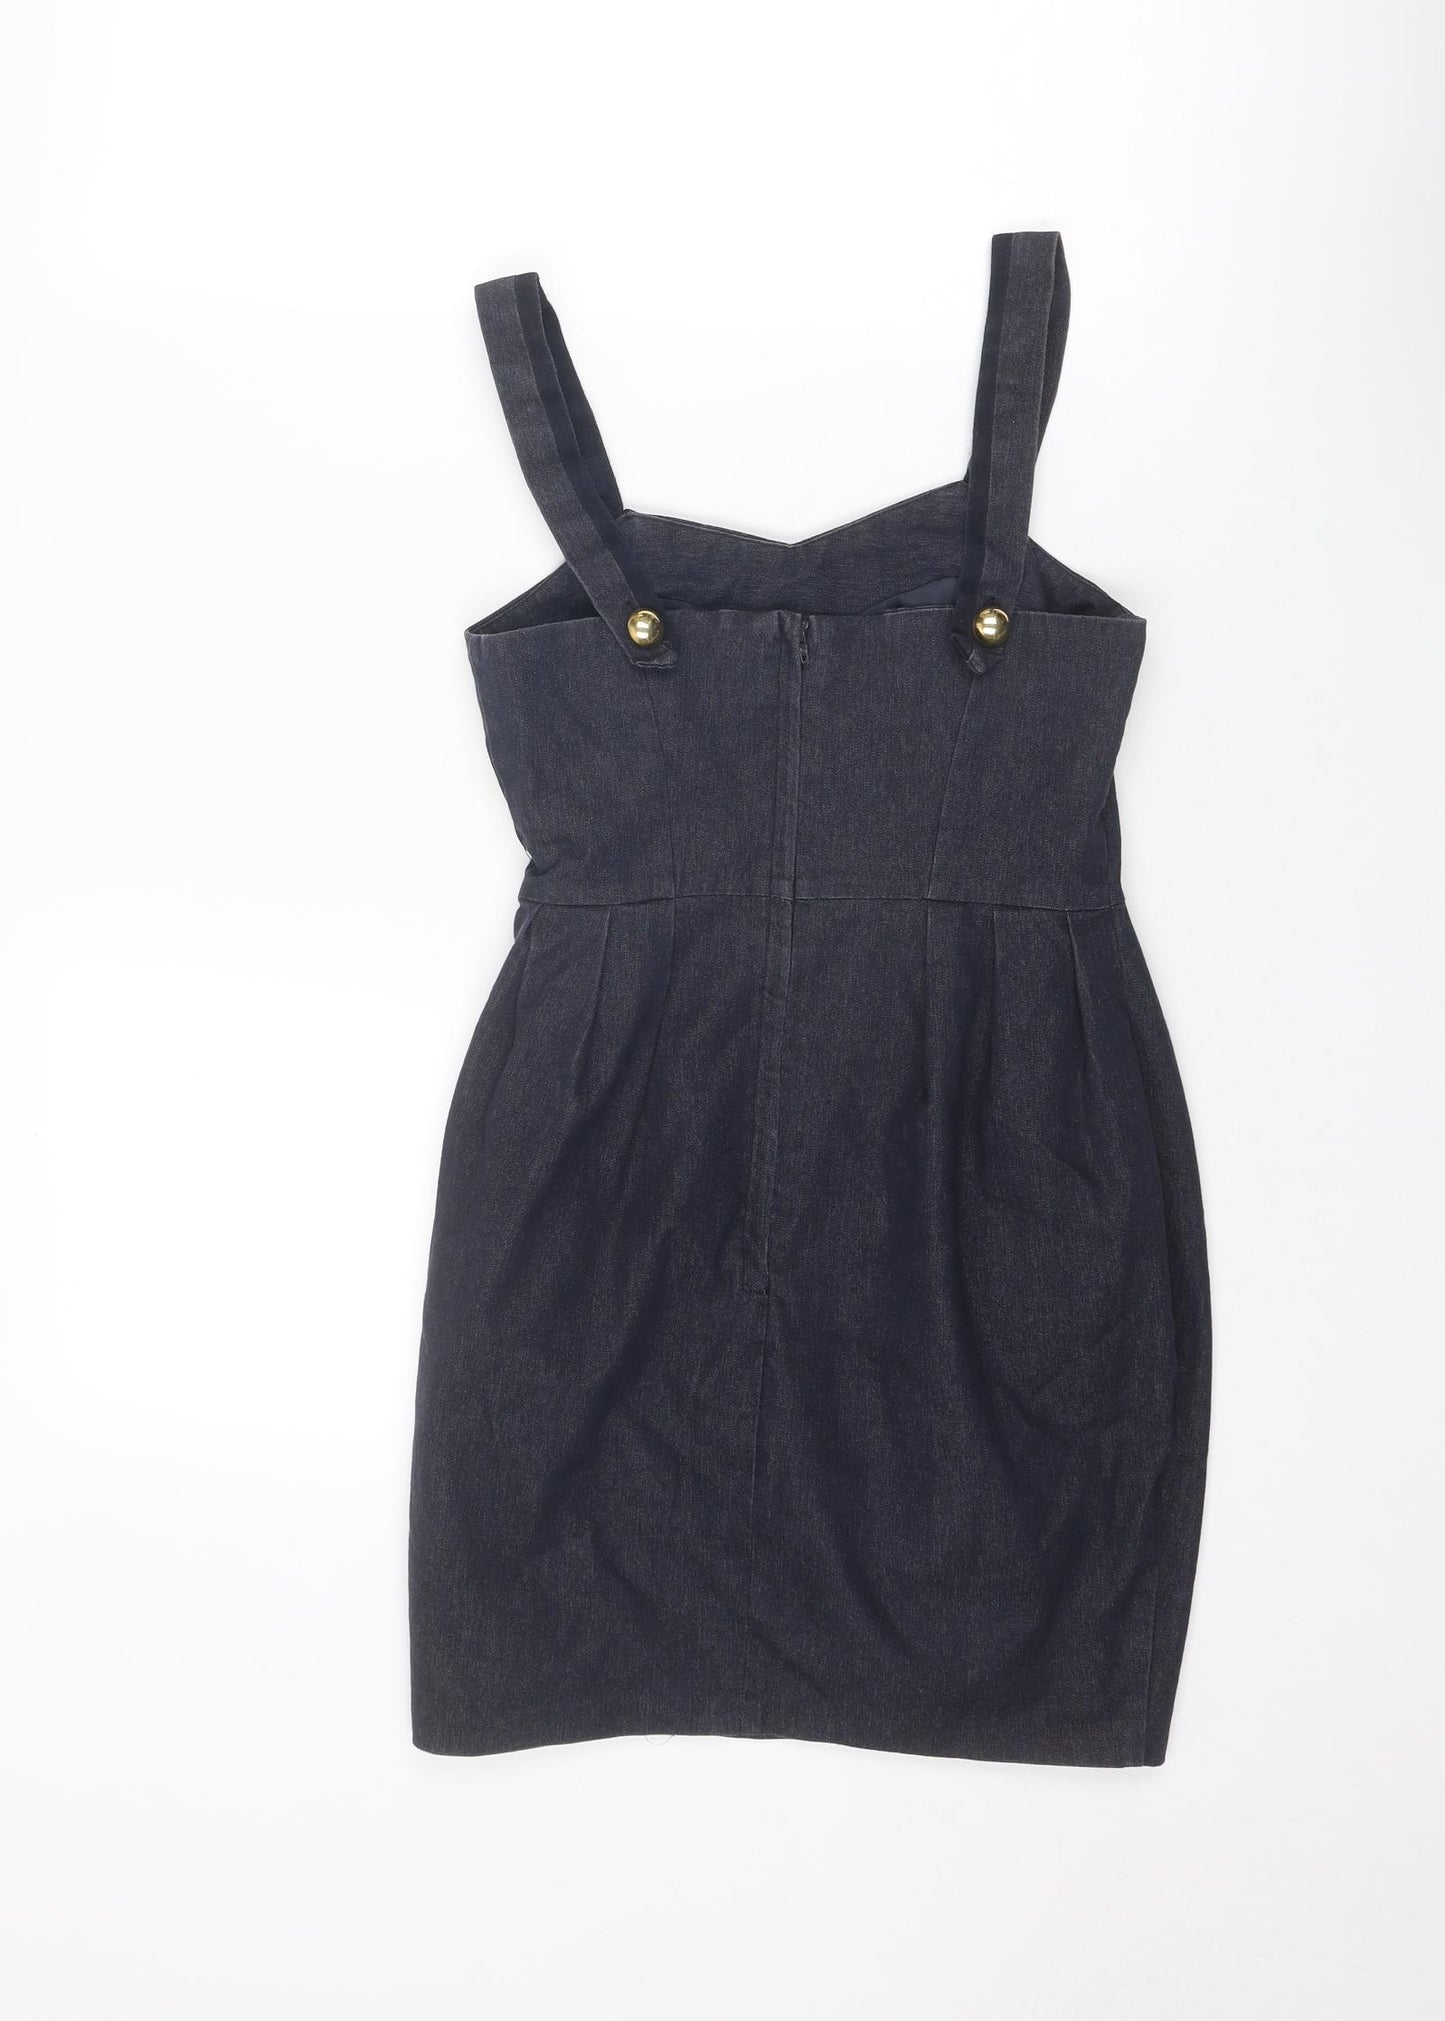 New Look Womens Blue Cotton Pinafore/Dungaree Dress Size 8 V-Neck Zip